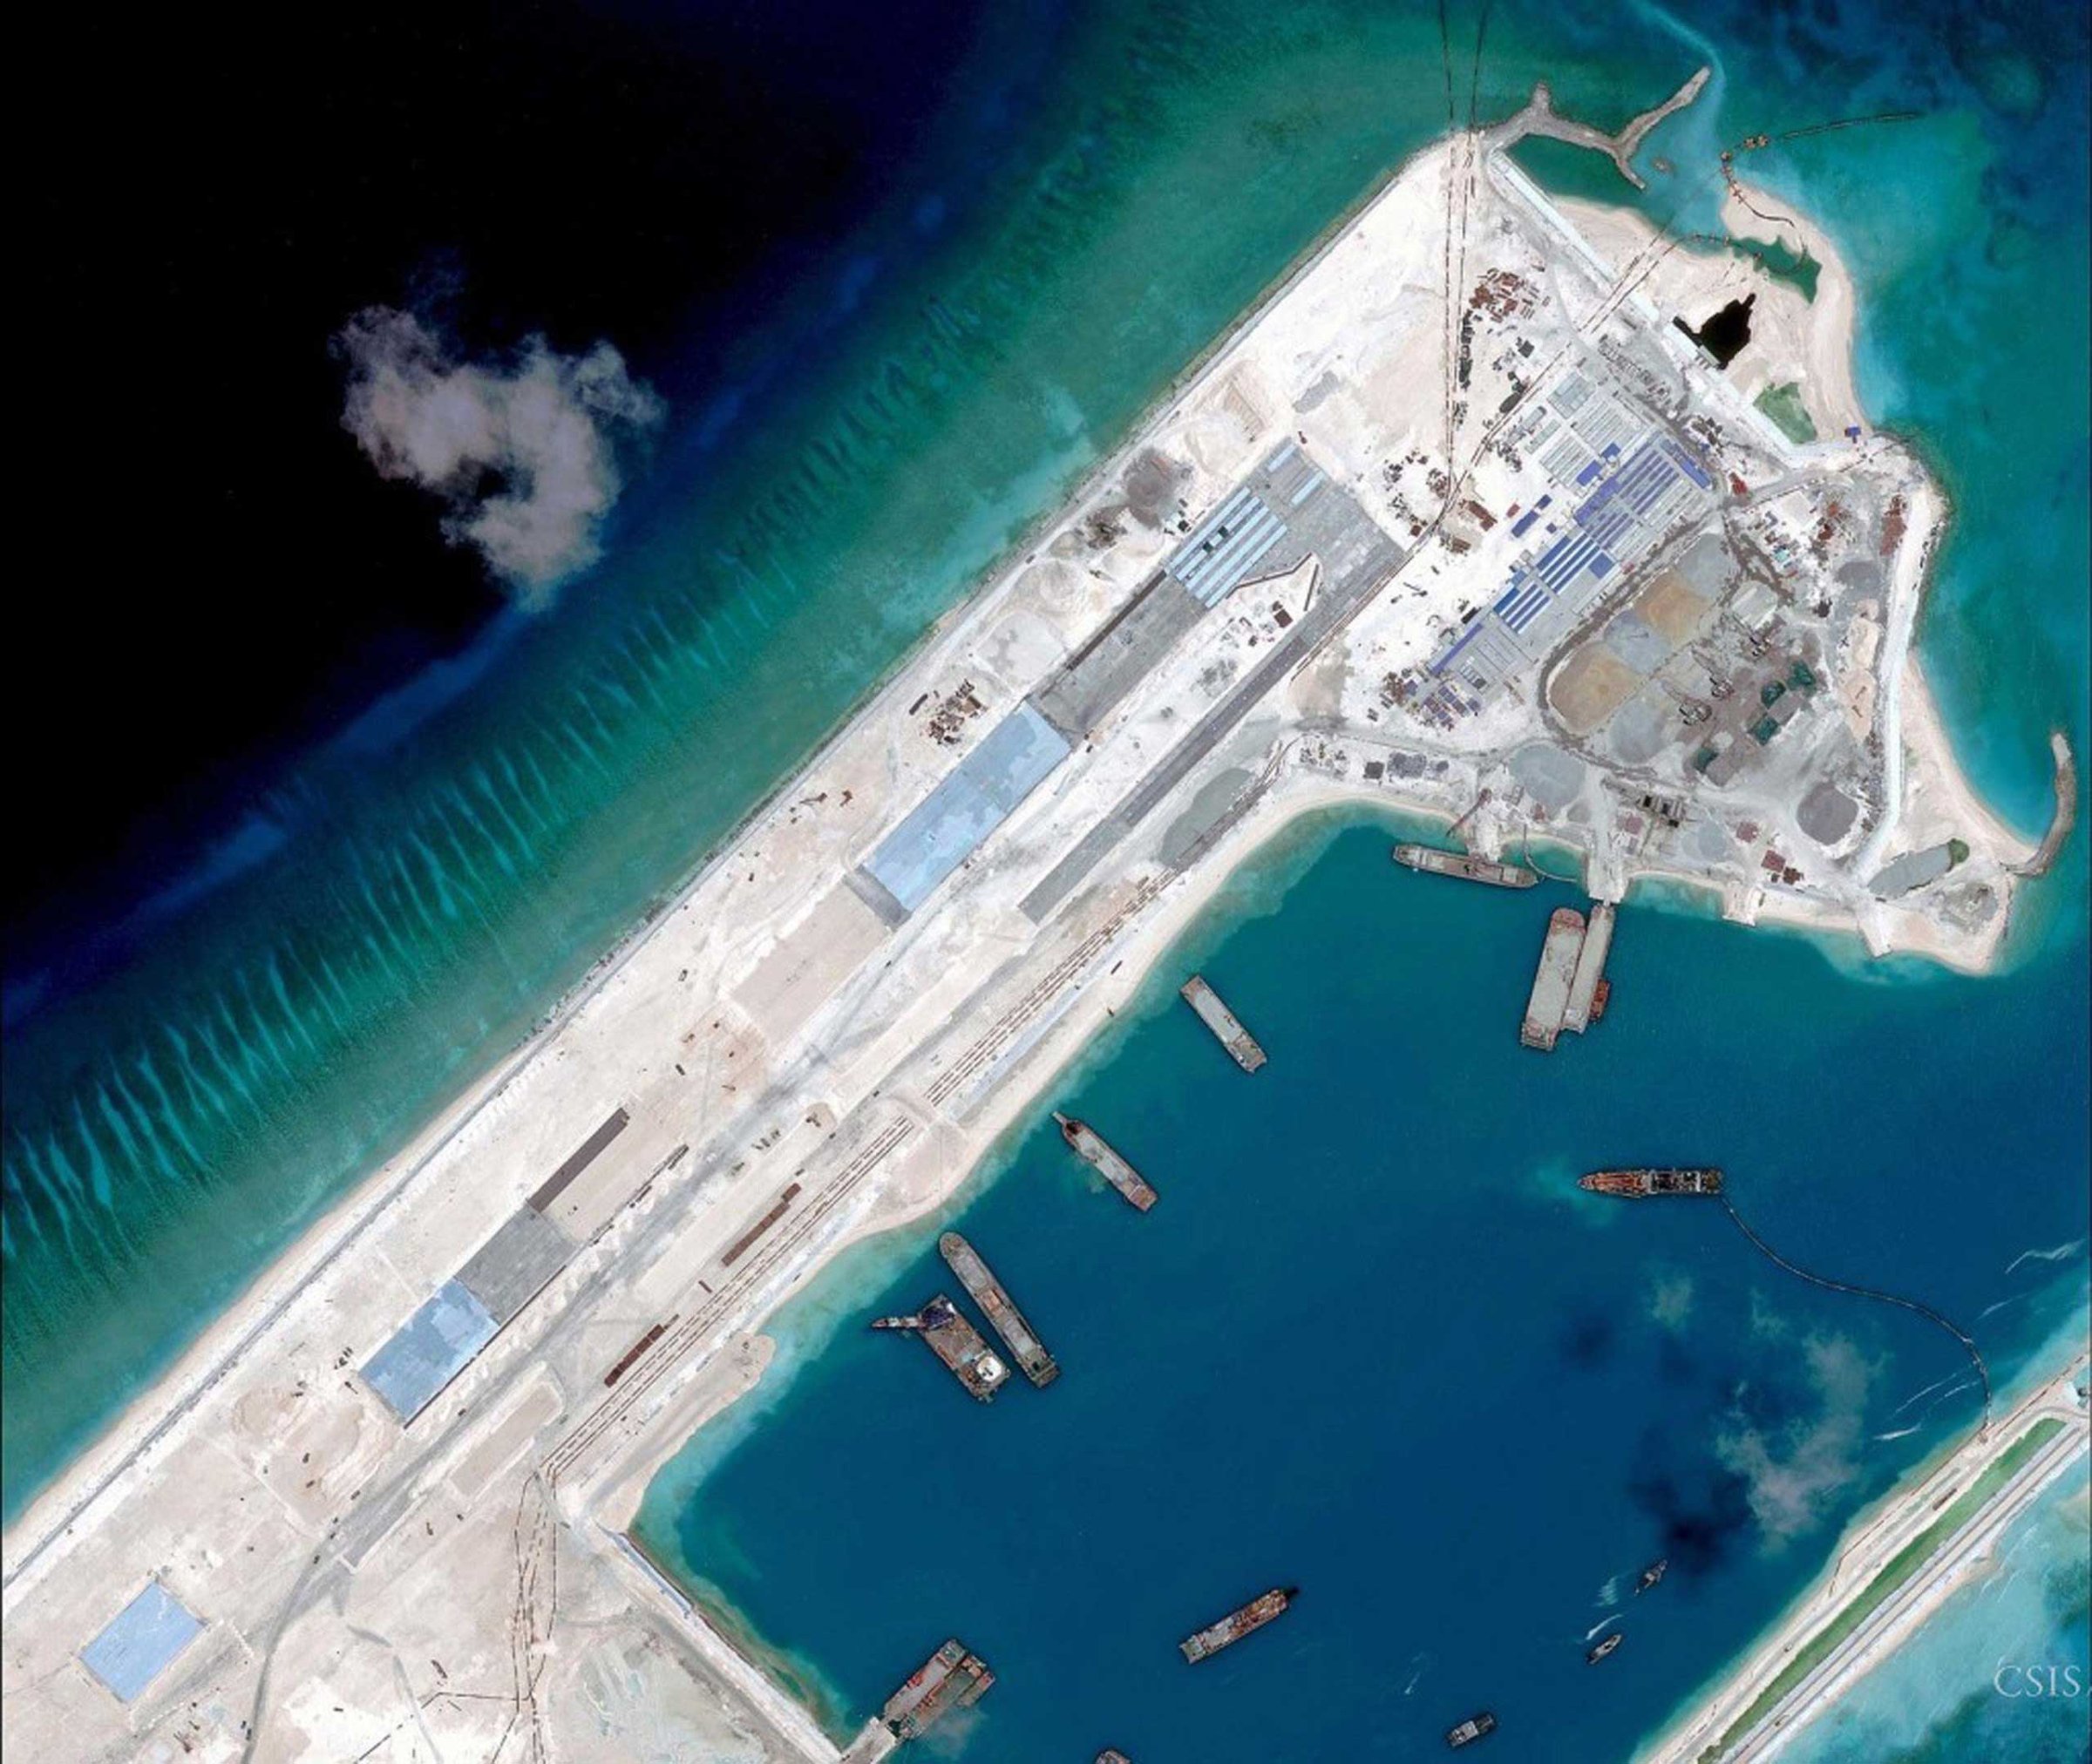 Airstrip construction on Fiery Cross Reef in the South China Sea, seen in a satellite image taken on April 2, 2015.